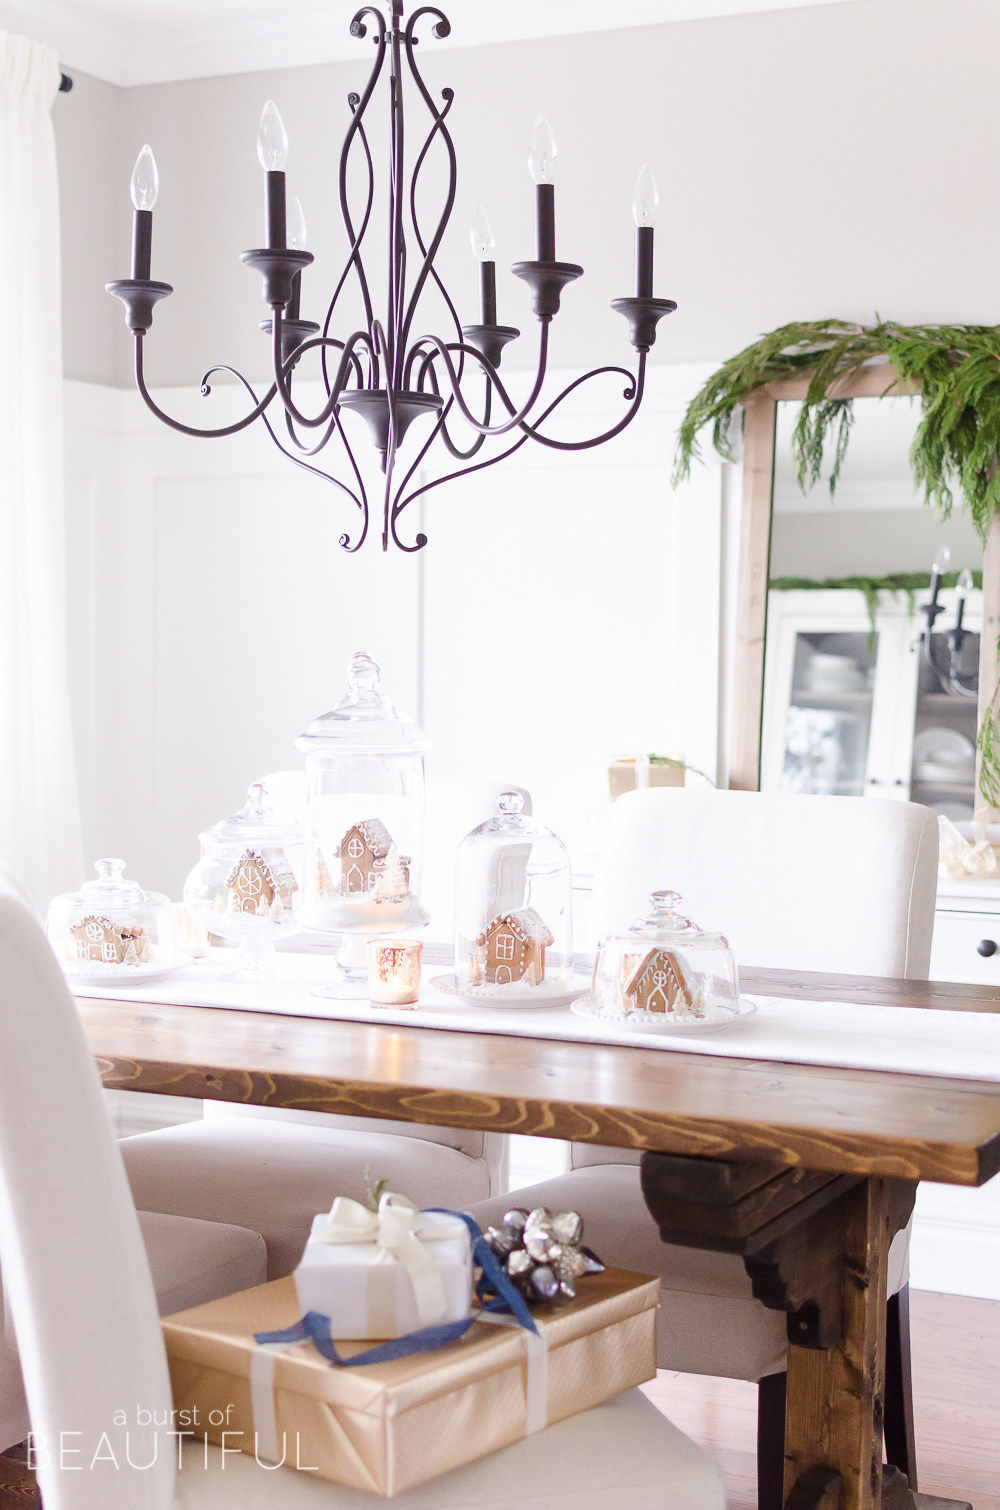 An inviting holiday dining room in this modern farmhouse is full of whimsical Christmas charm